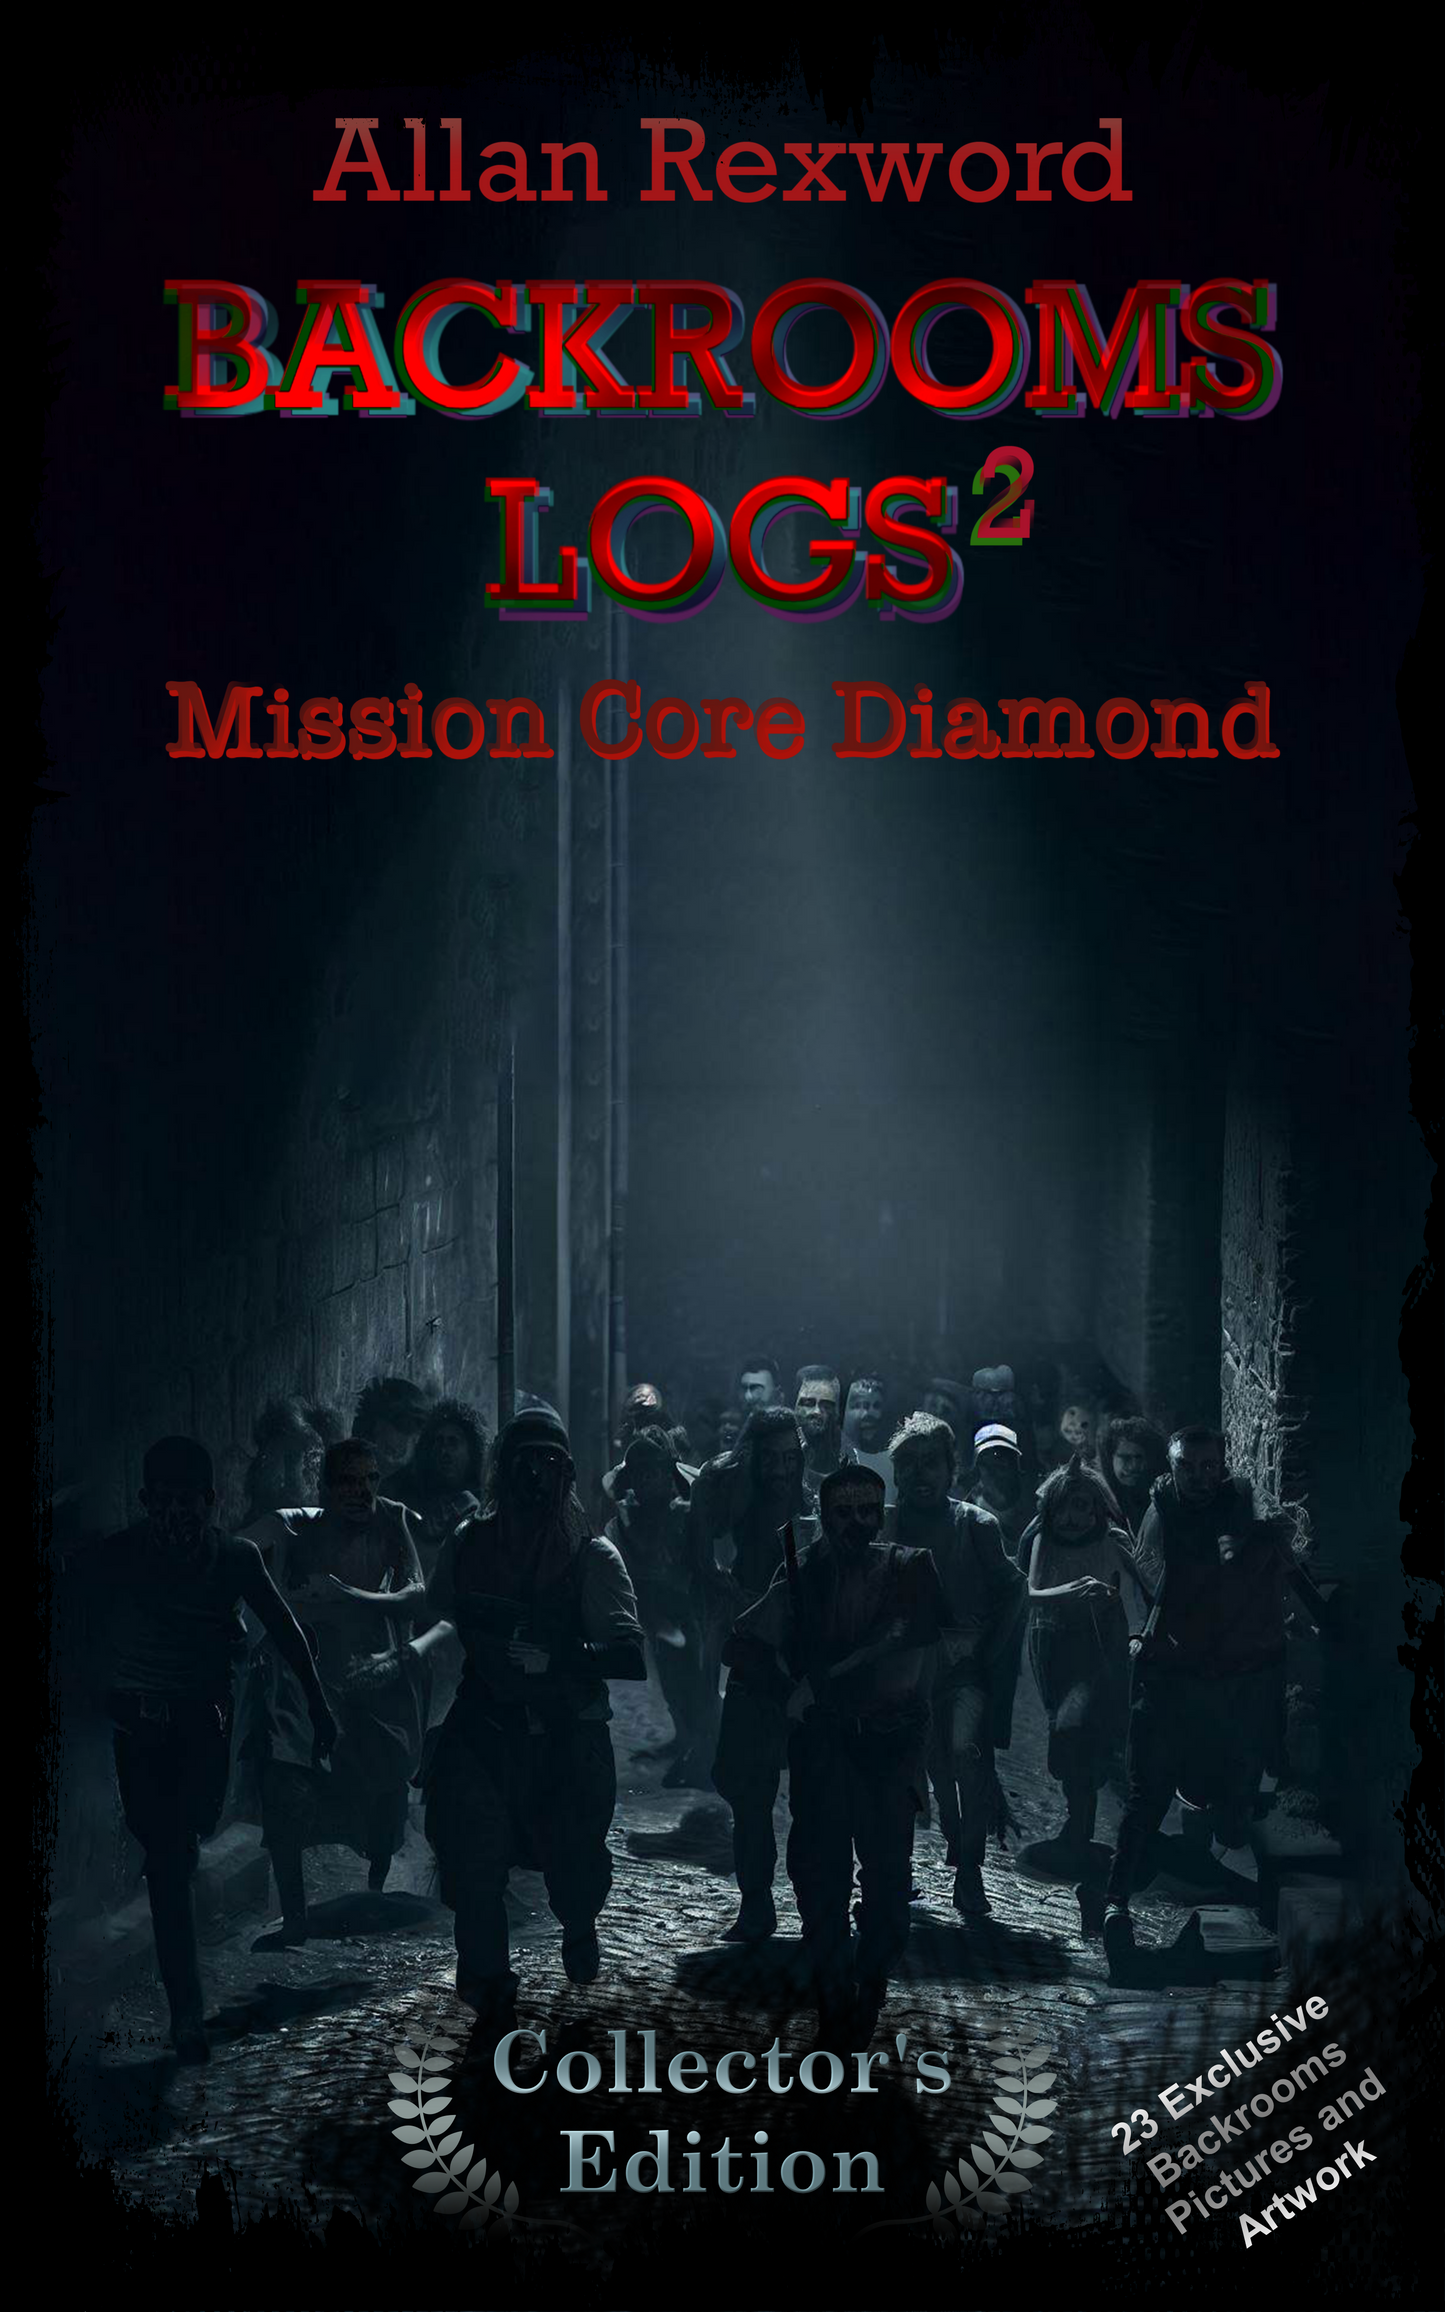 Backrooms Logs²: Mission Core Diamond (Collector's Edition, handsigniert + Widmung)